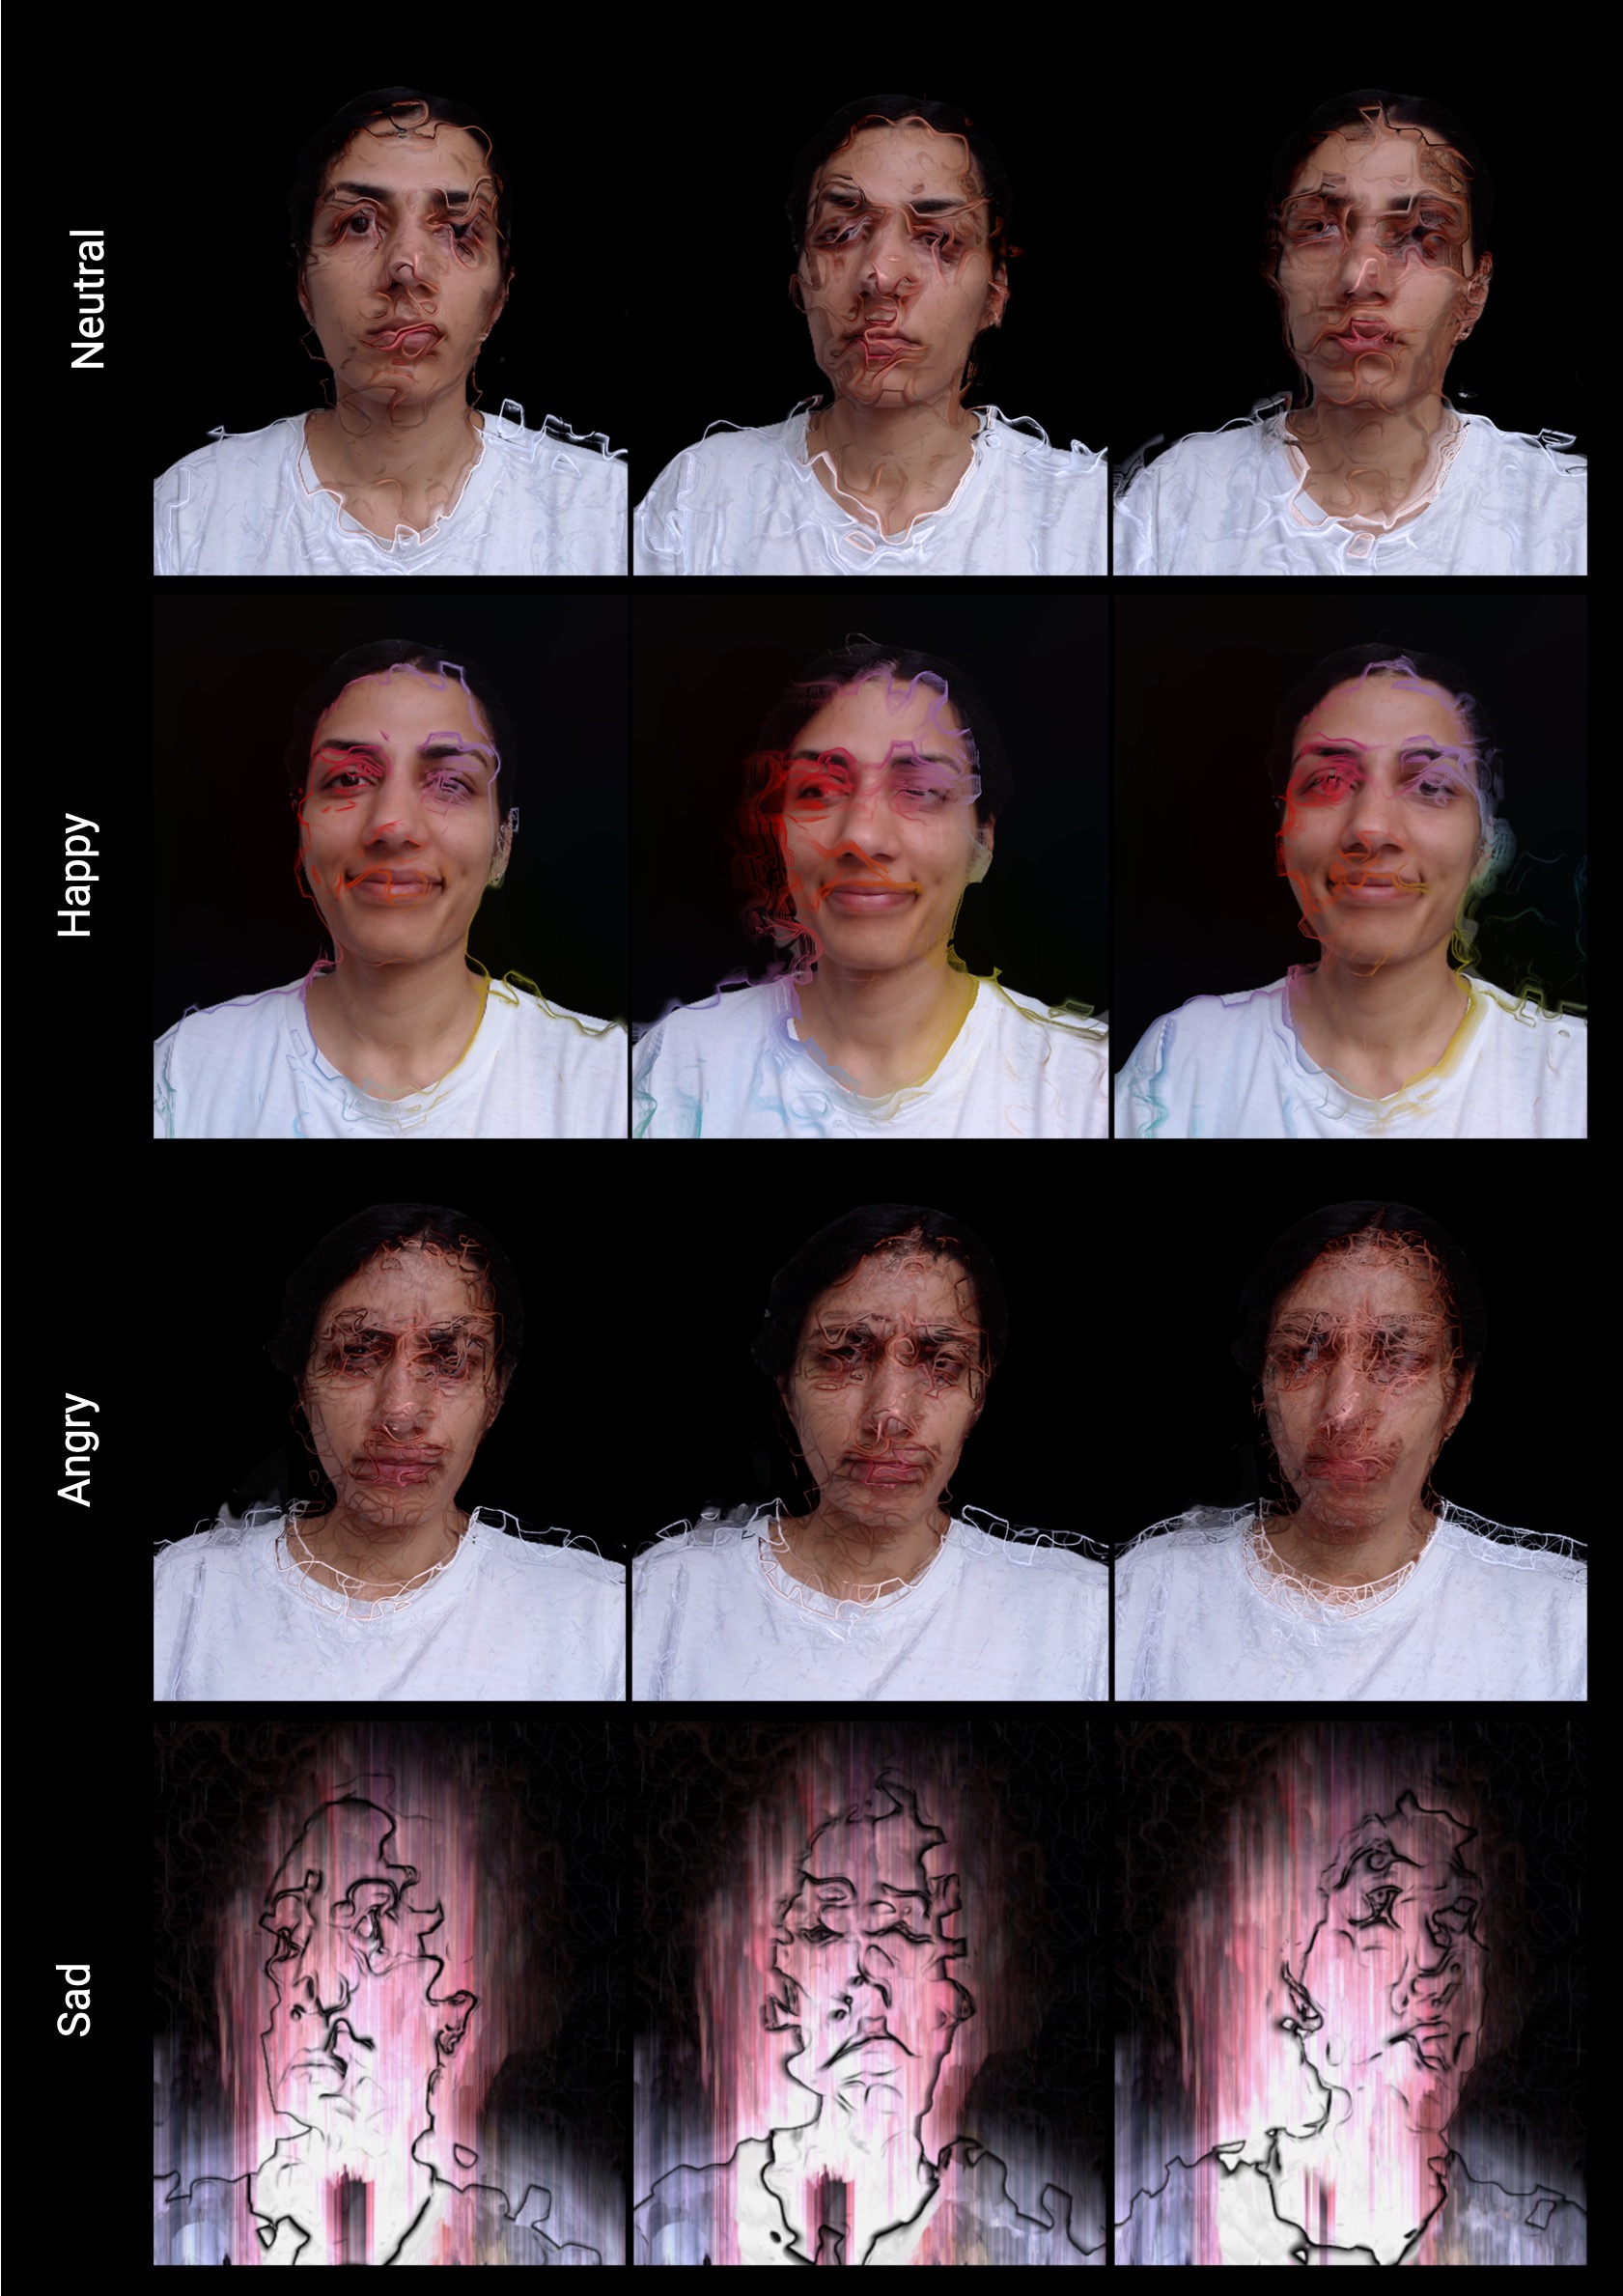 distortion effects according to facial expression